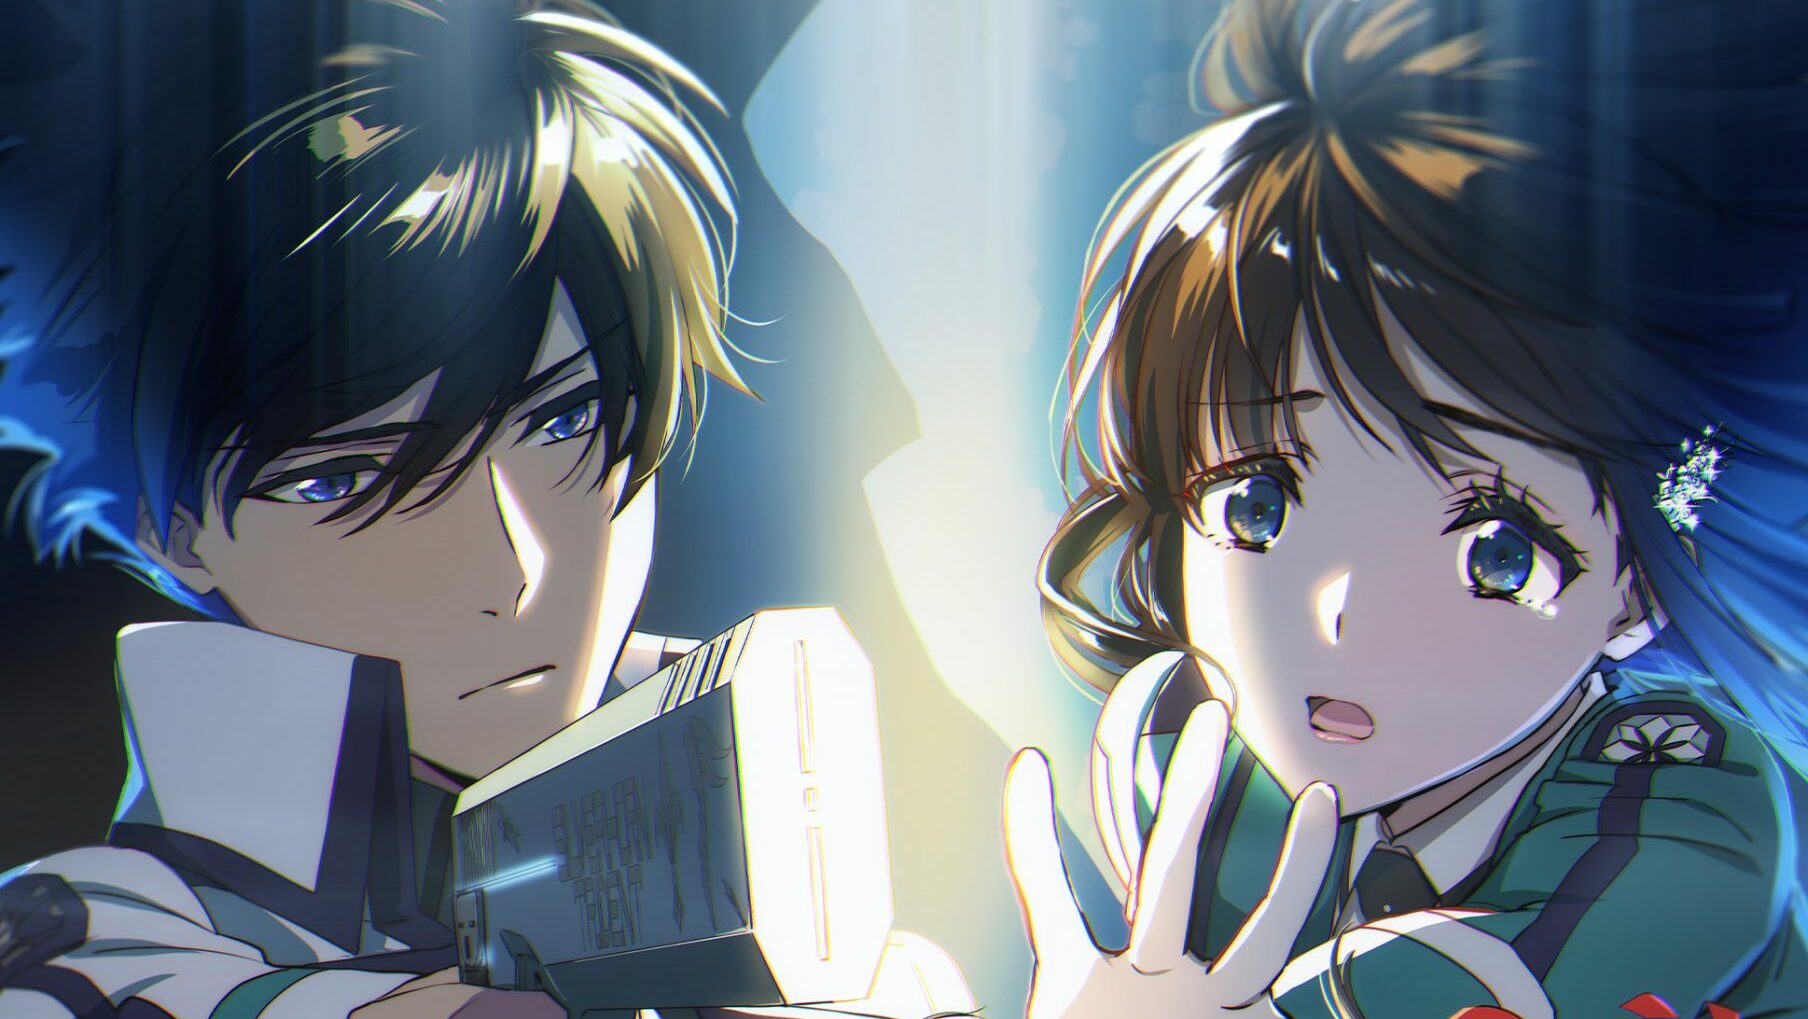 Why Irregular at Magic High School Is So Popular But Incredibly Divisive